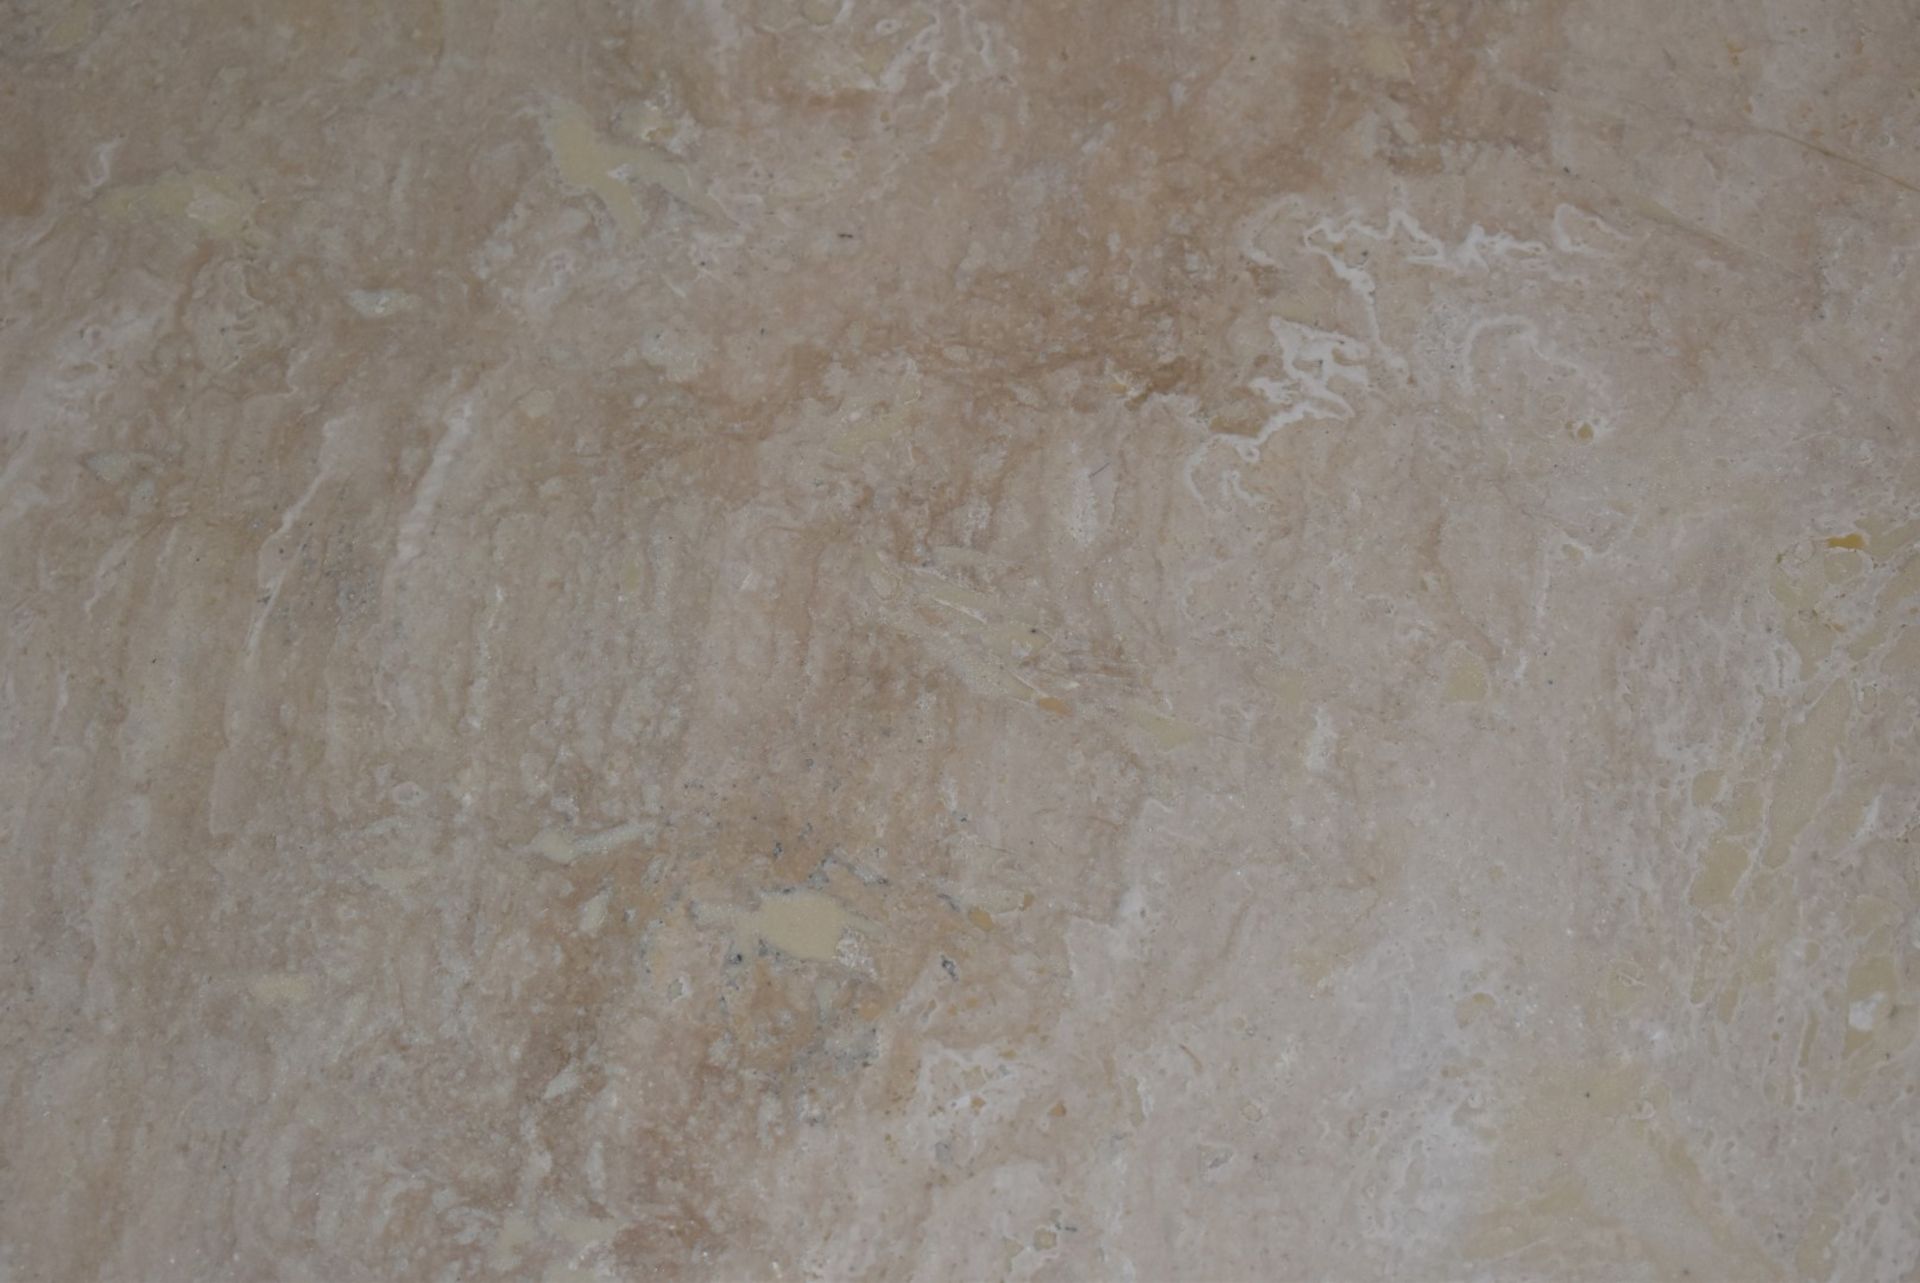 1 x Stonearth Luxury Solid Travertine Stone 900mm Shower Tray - Hand Made From Travertine Stone - Image 10 of 12